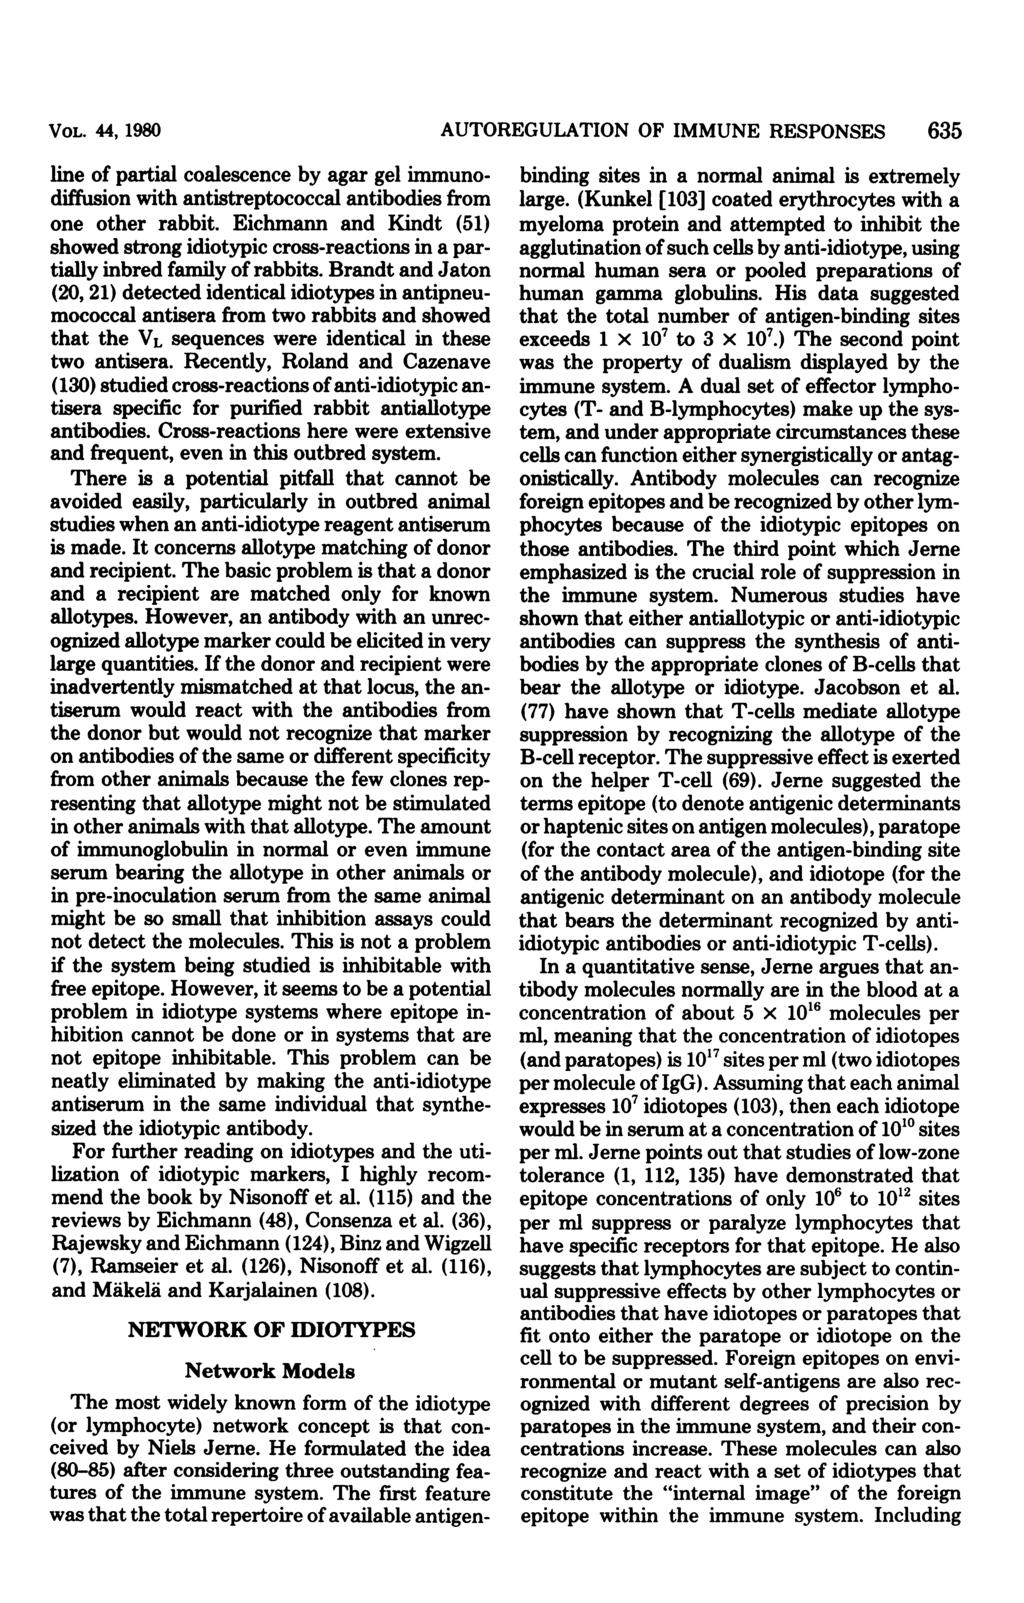 VOL. 44, 1980 line of partial coalescence by agar gel immunodiffusion with antistreptococcal antibodies from one other rabbit.